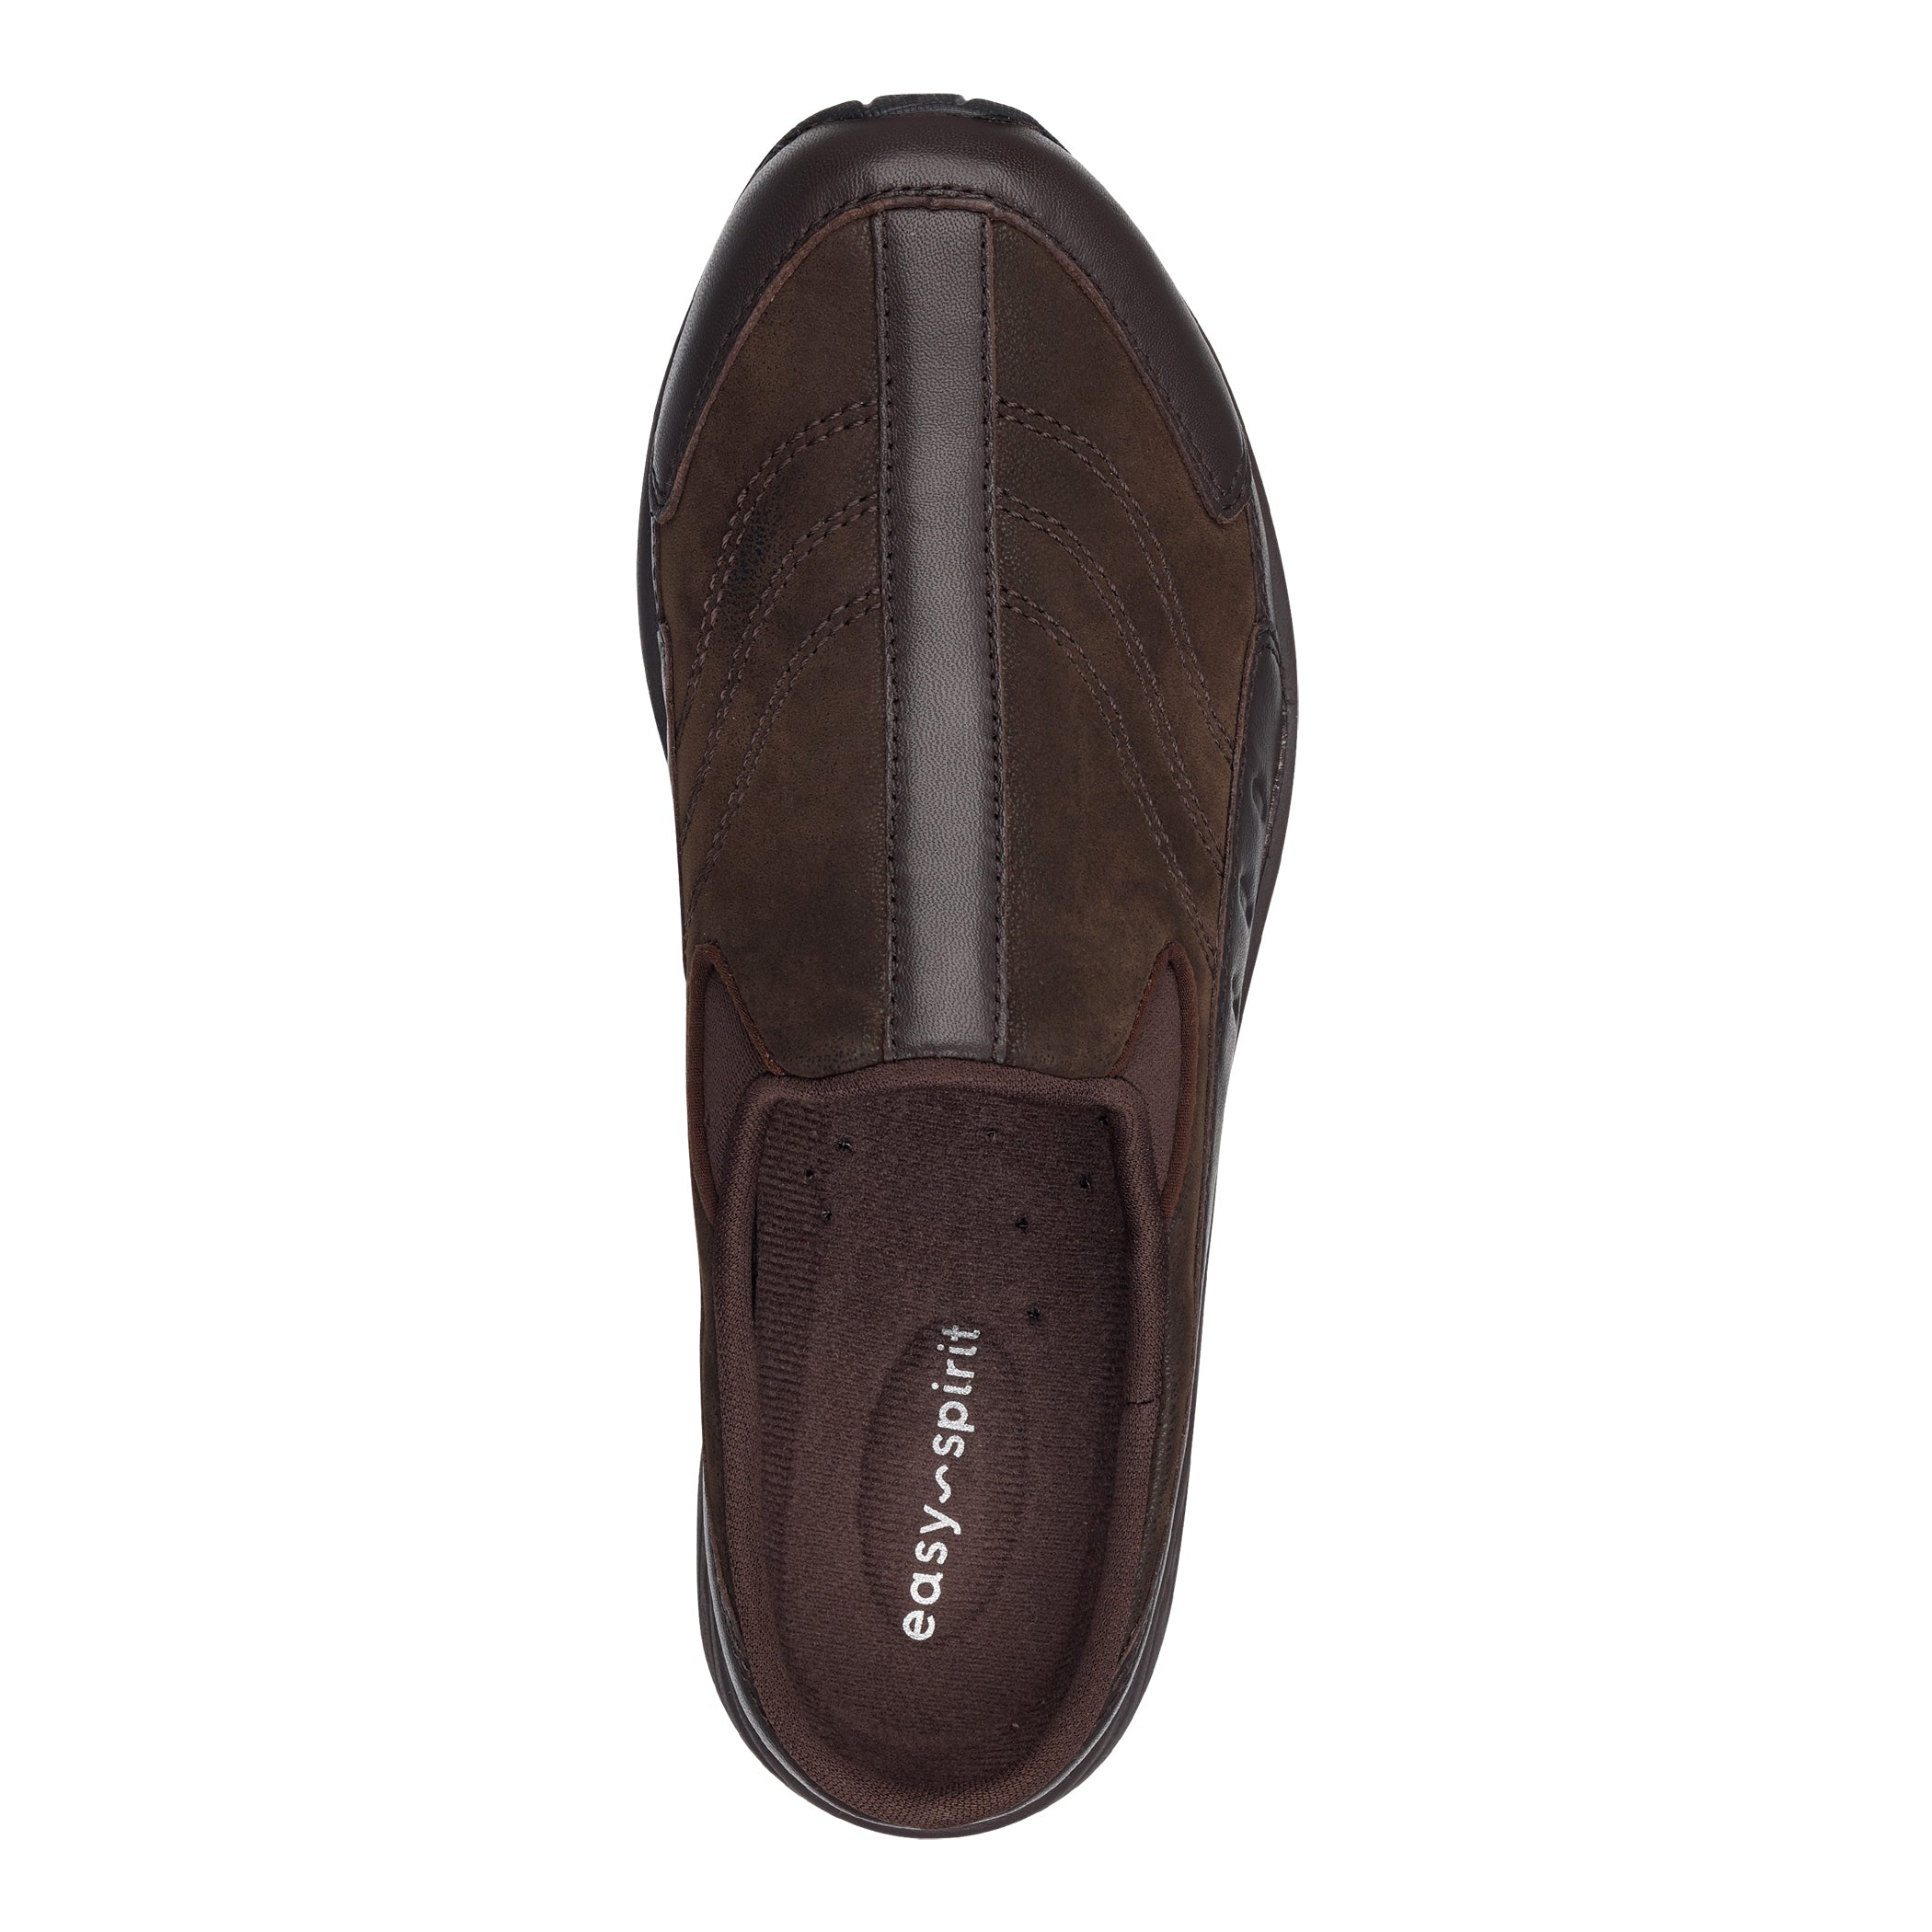 Traveltime Leather Clogs